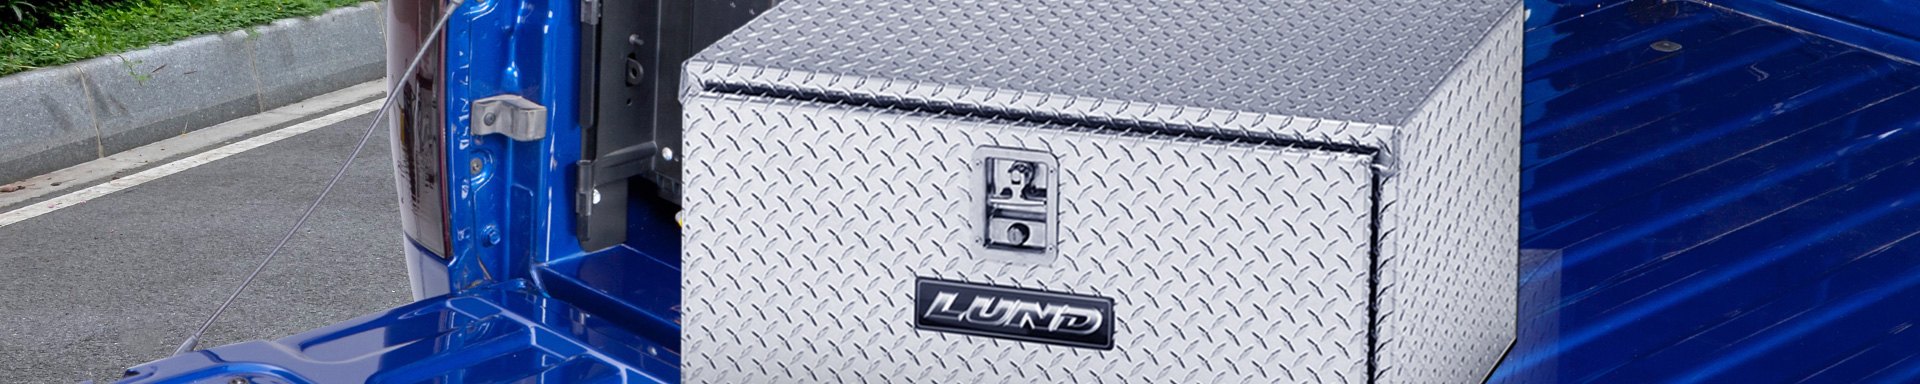 Lund Tool & Battery Boxes